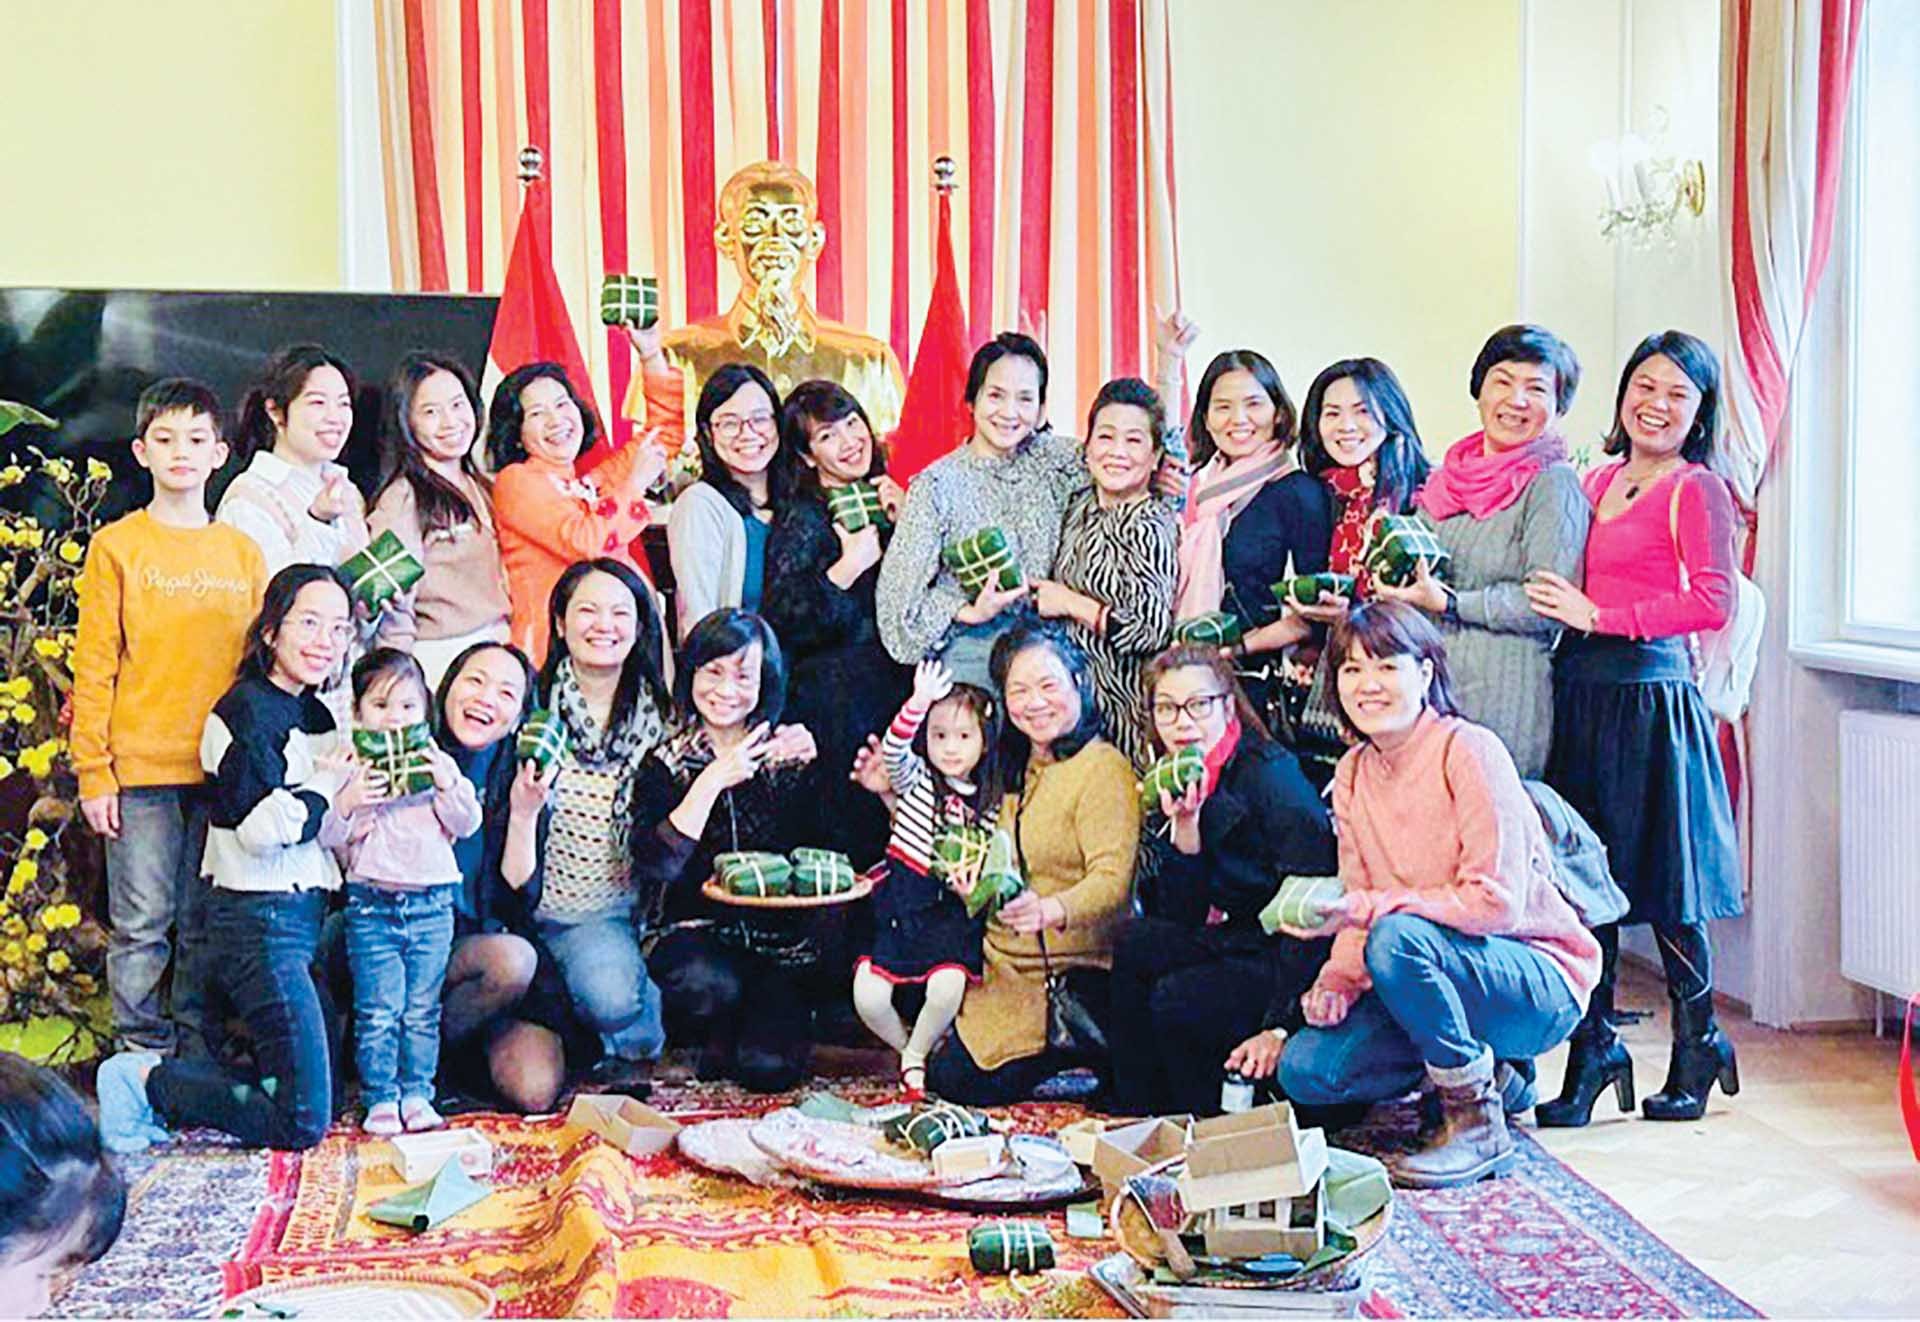 The Vietnamese Women’s Union in Austria organized a Chung cake making event on the first Full Moon of the Lunar New Year.  (Photo: Ngo Thuy)